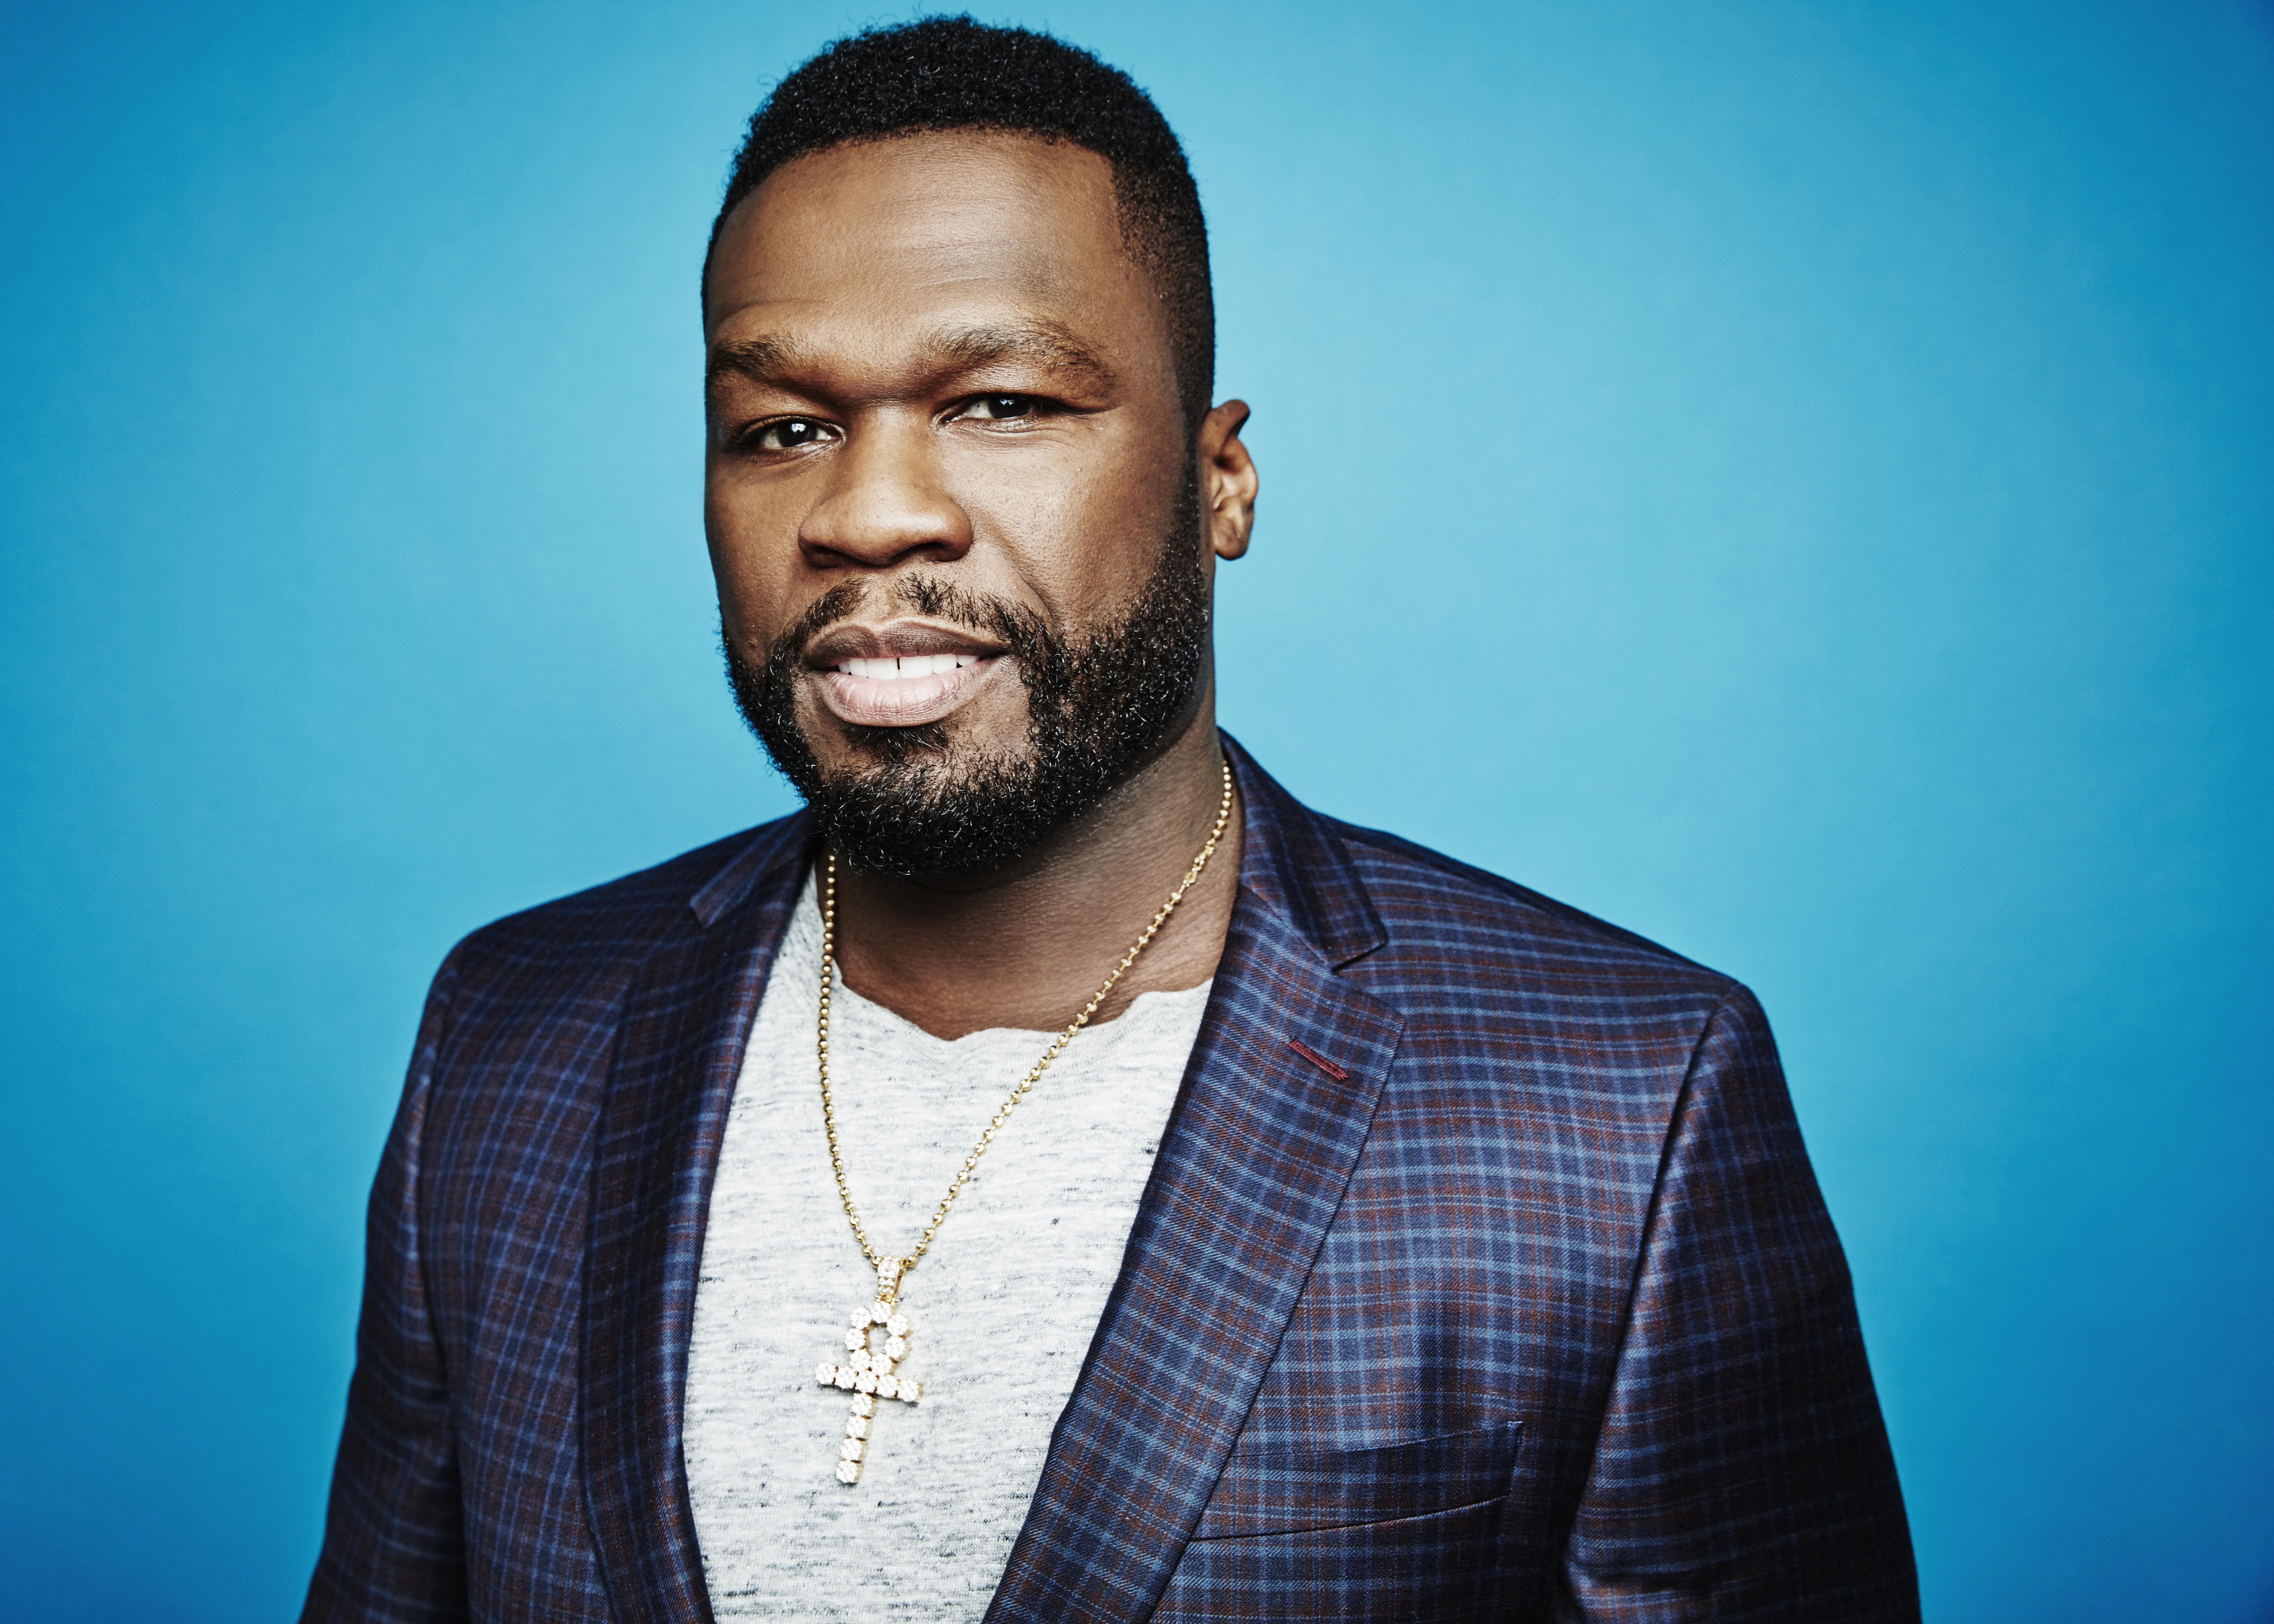 50 Cent Will Be The Host of ’50 Central’ A New Late Night Talk Show